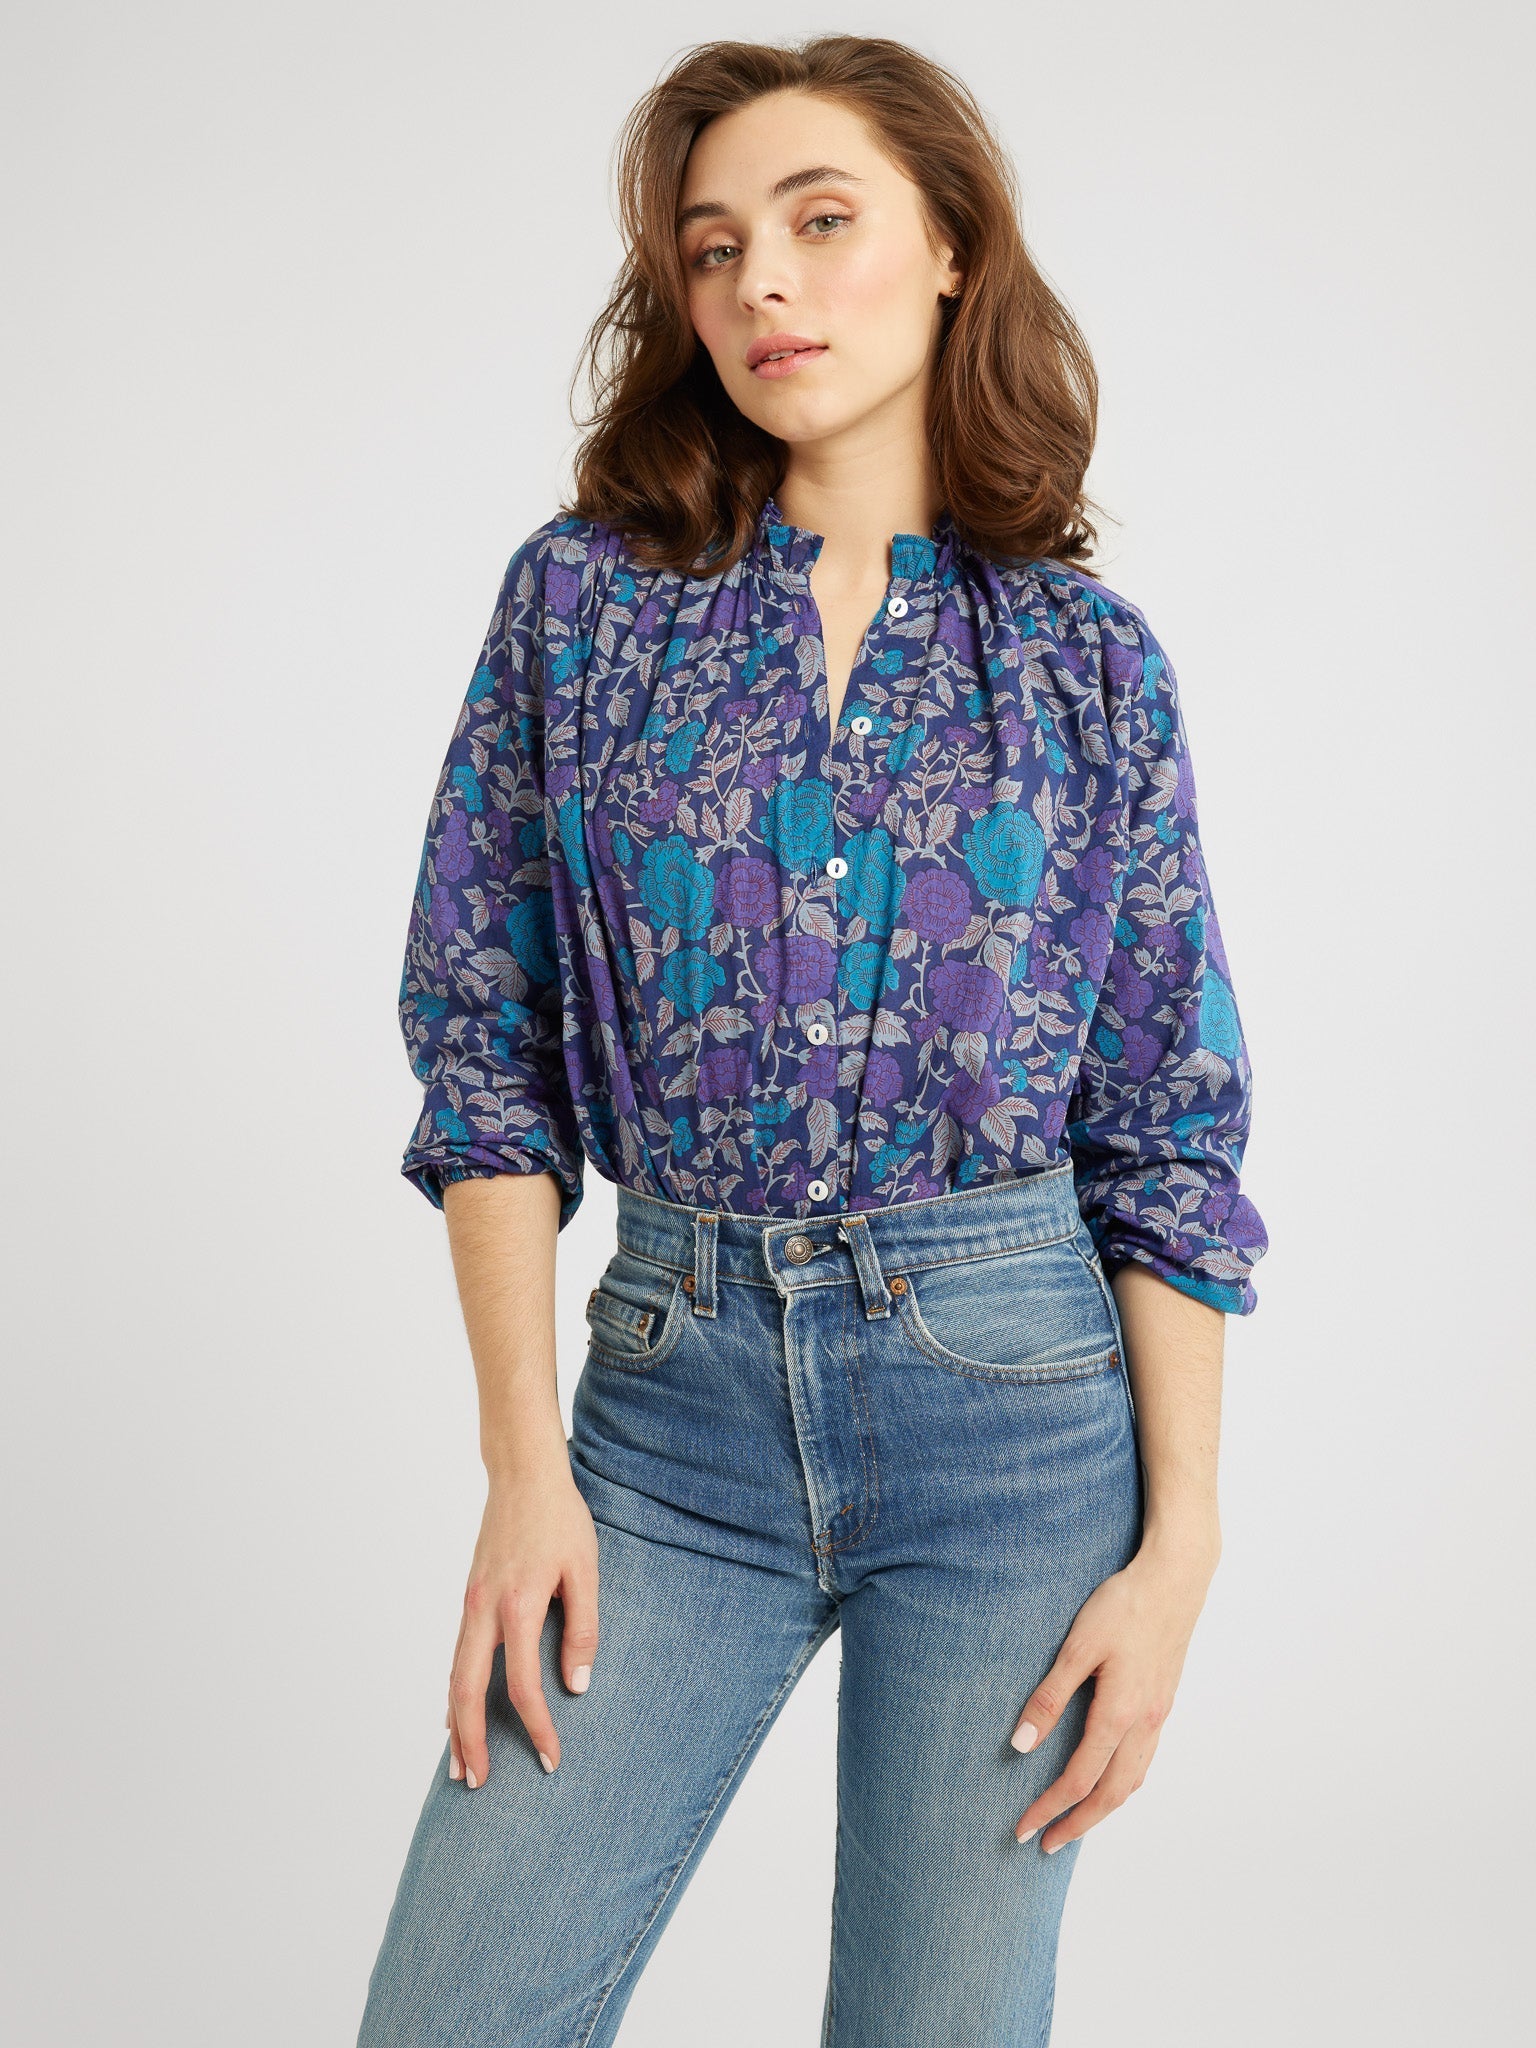 MILLE Clothing Francesca Top in Twilight